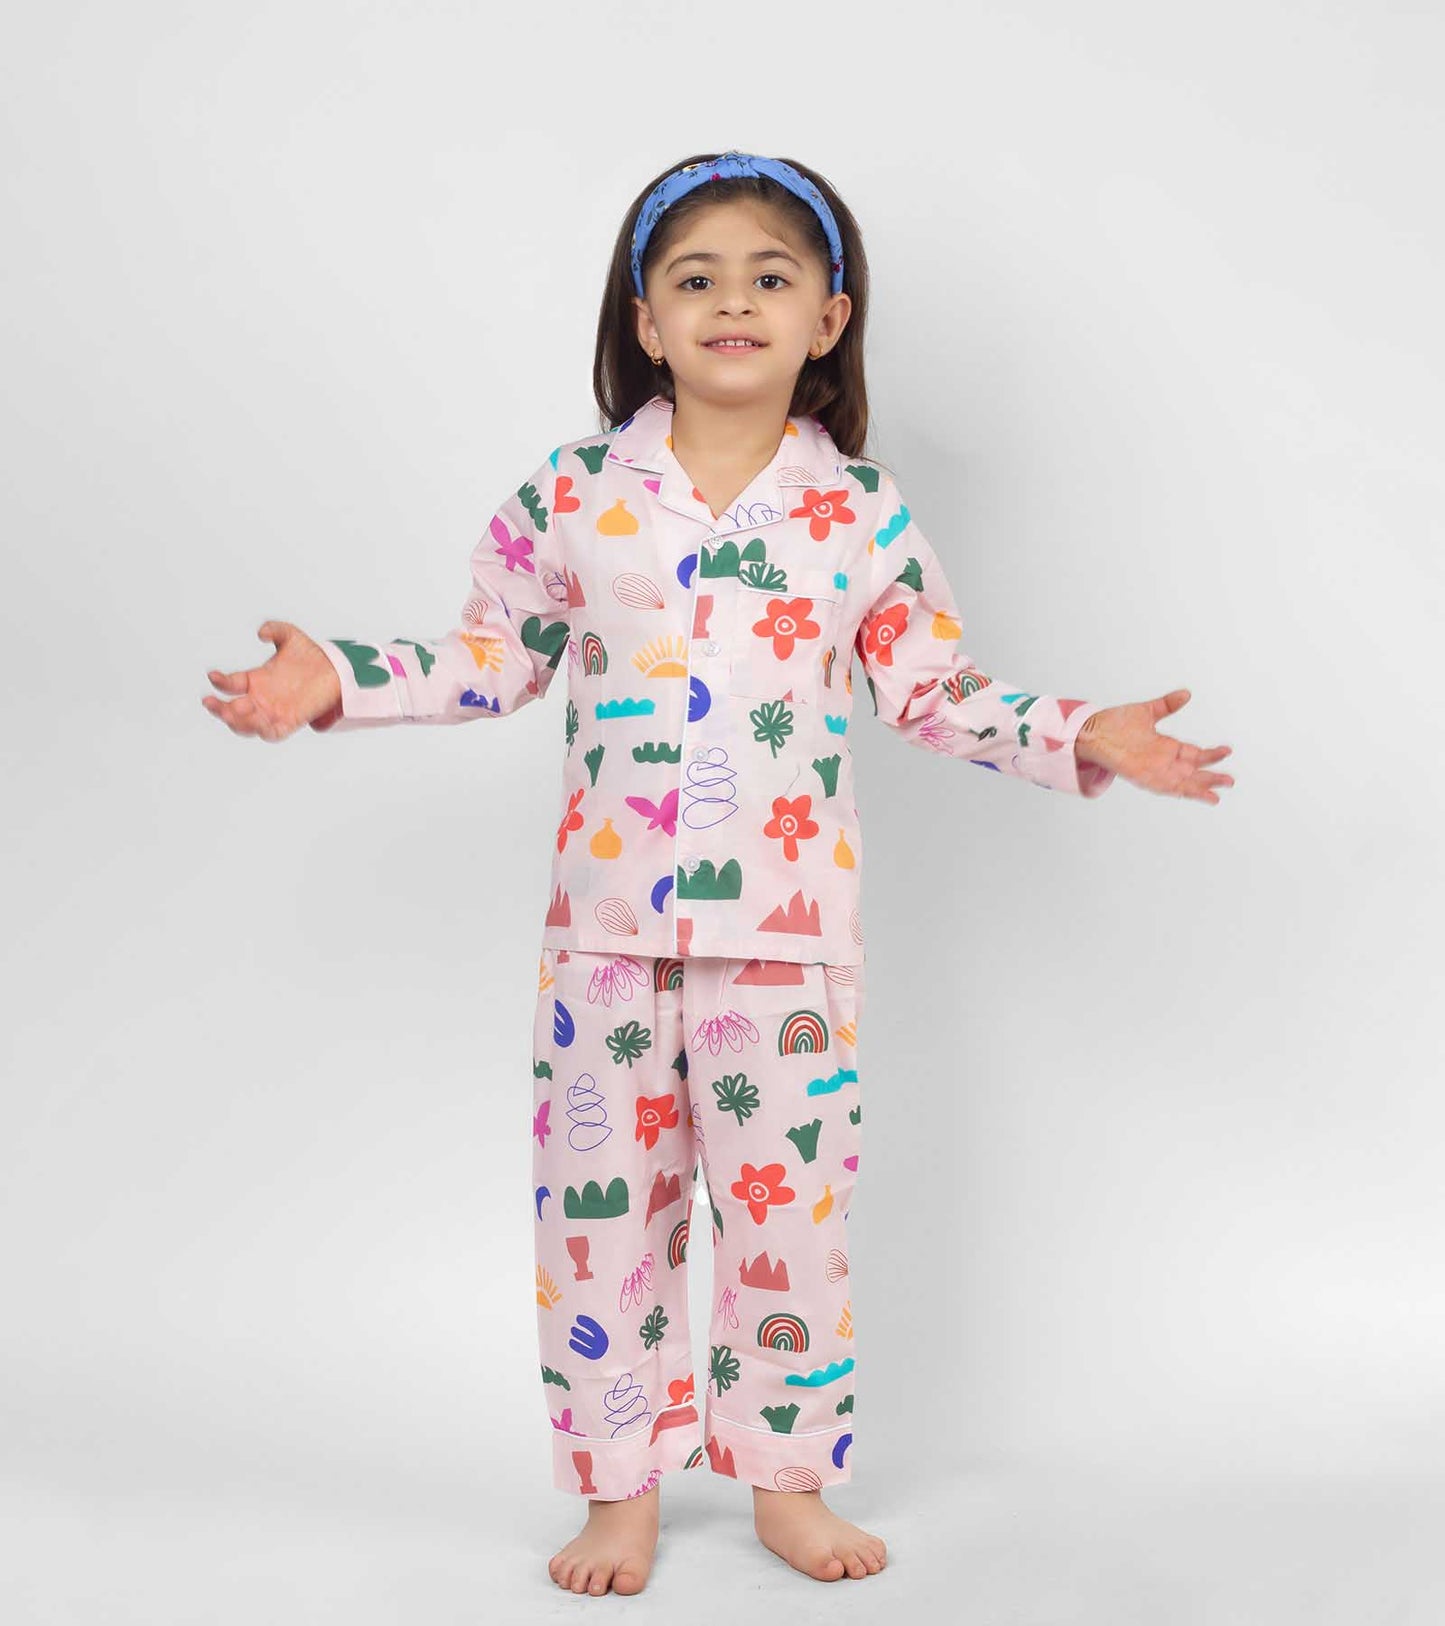 Hale and Heart Printed Girls Nightsuit Set